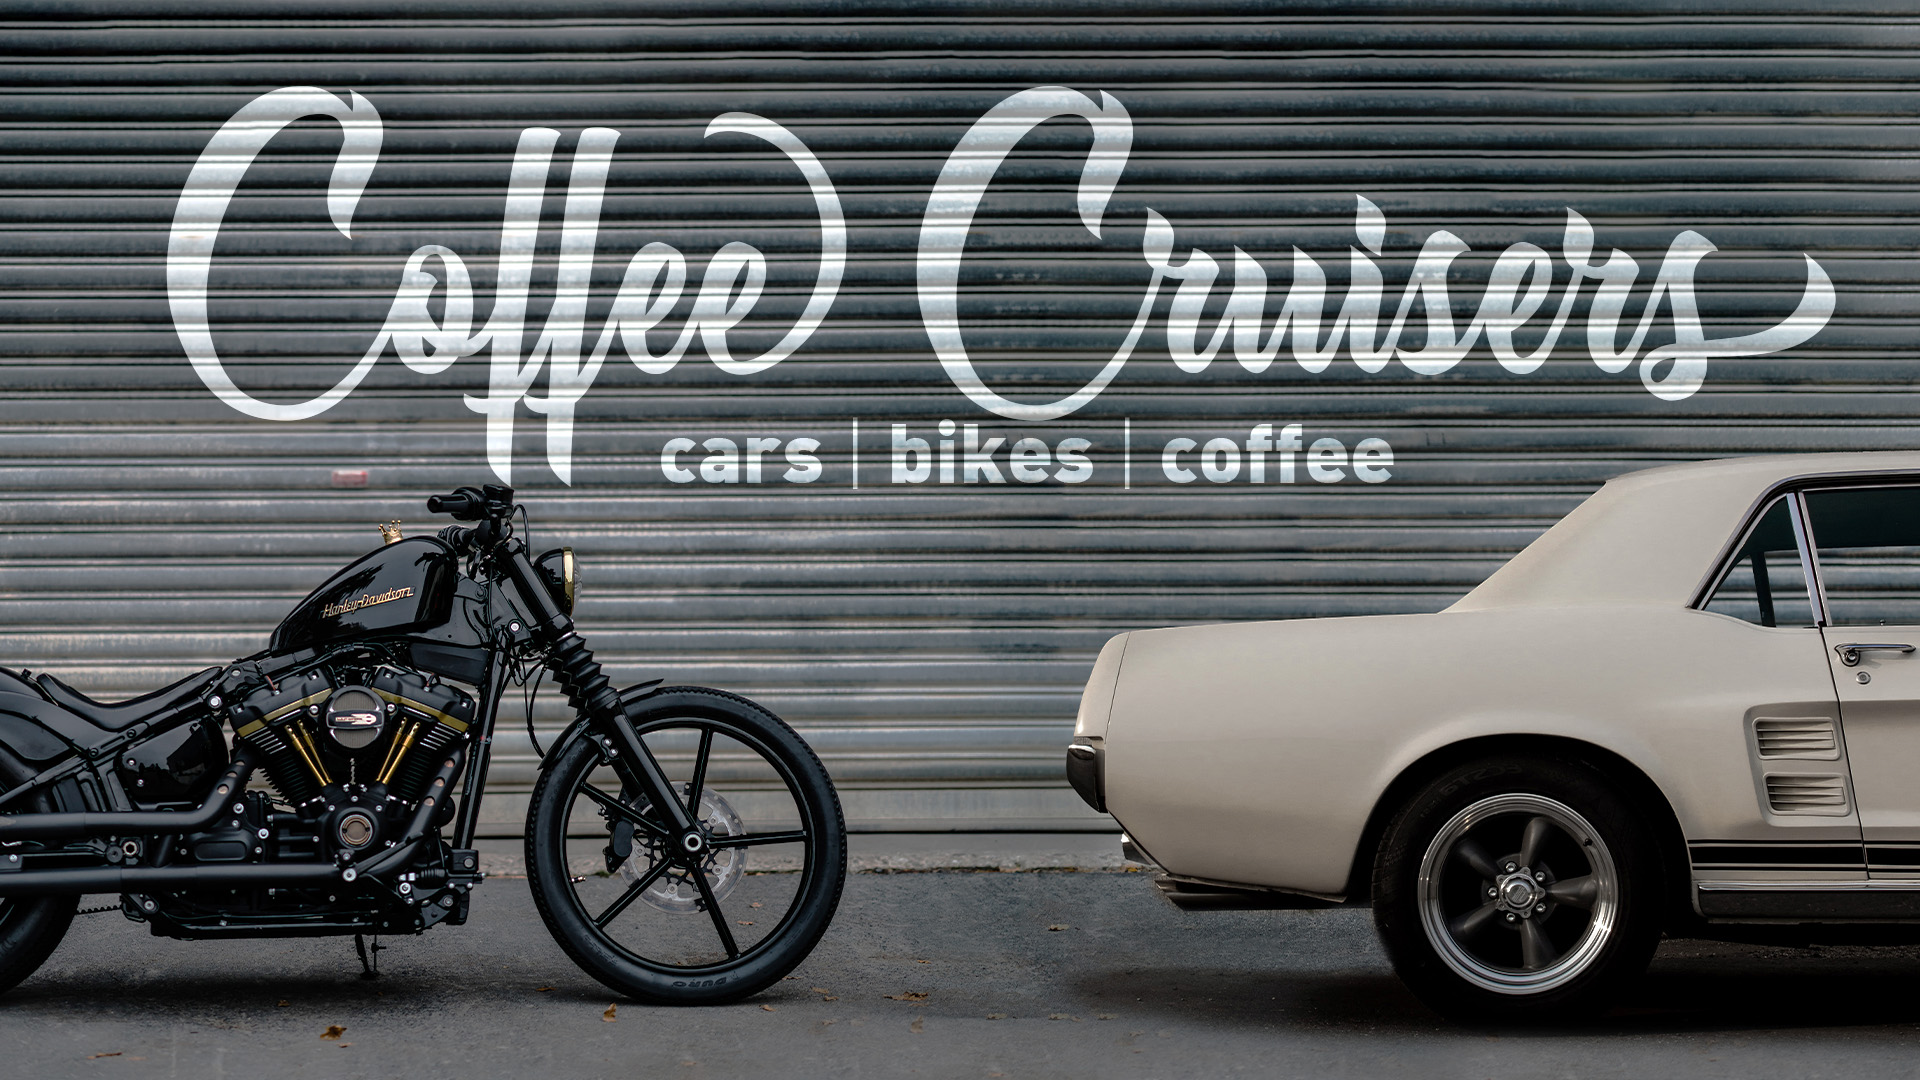 Coffee Cruisers

Last Saturday of the month
July 27
7:00am-10:00am
